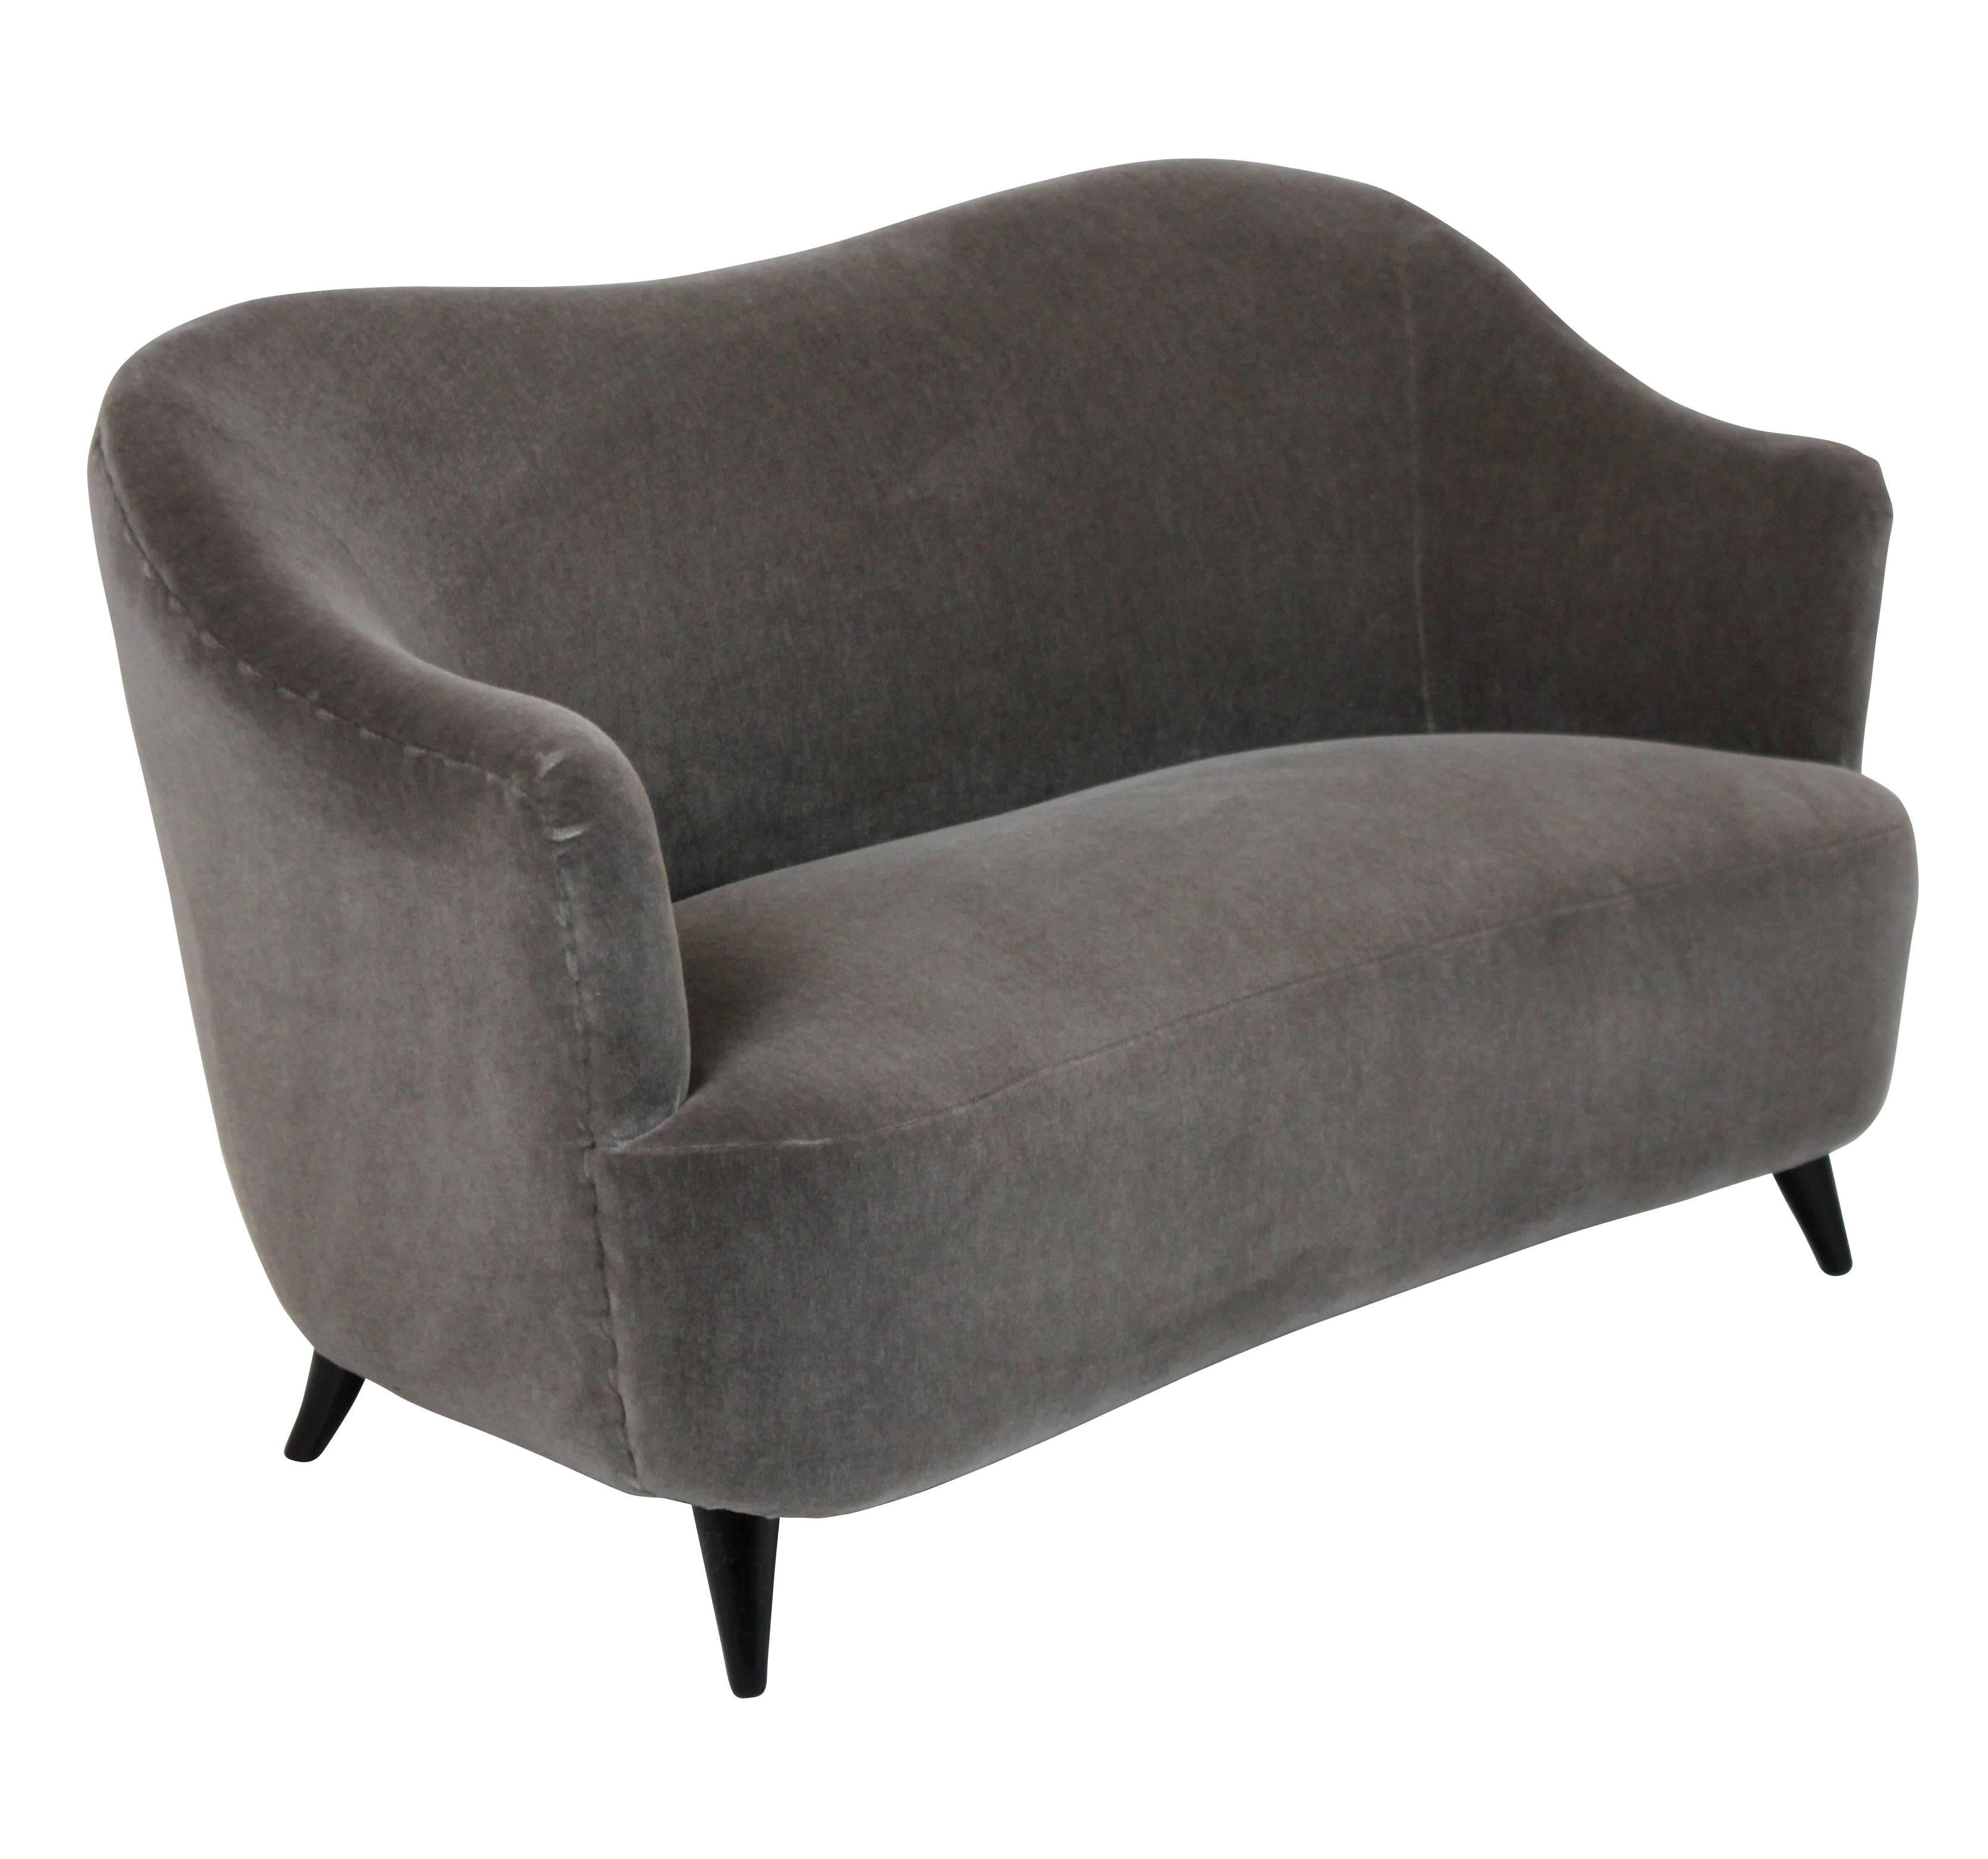 A sculptural Italian two set sofa with ebonized legs and newly upholstered in Donghia of NY mohair velvet.